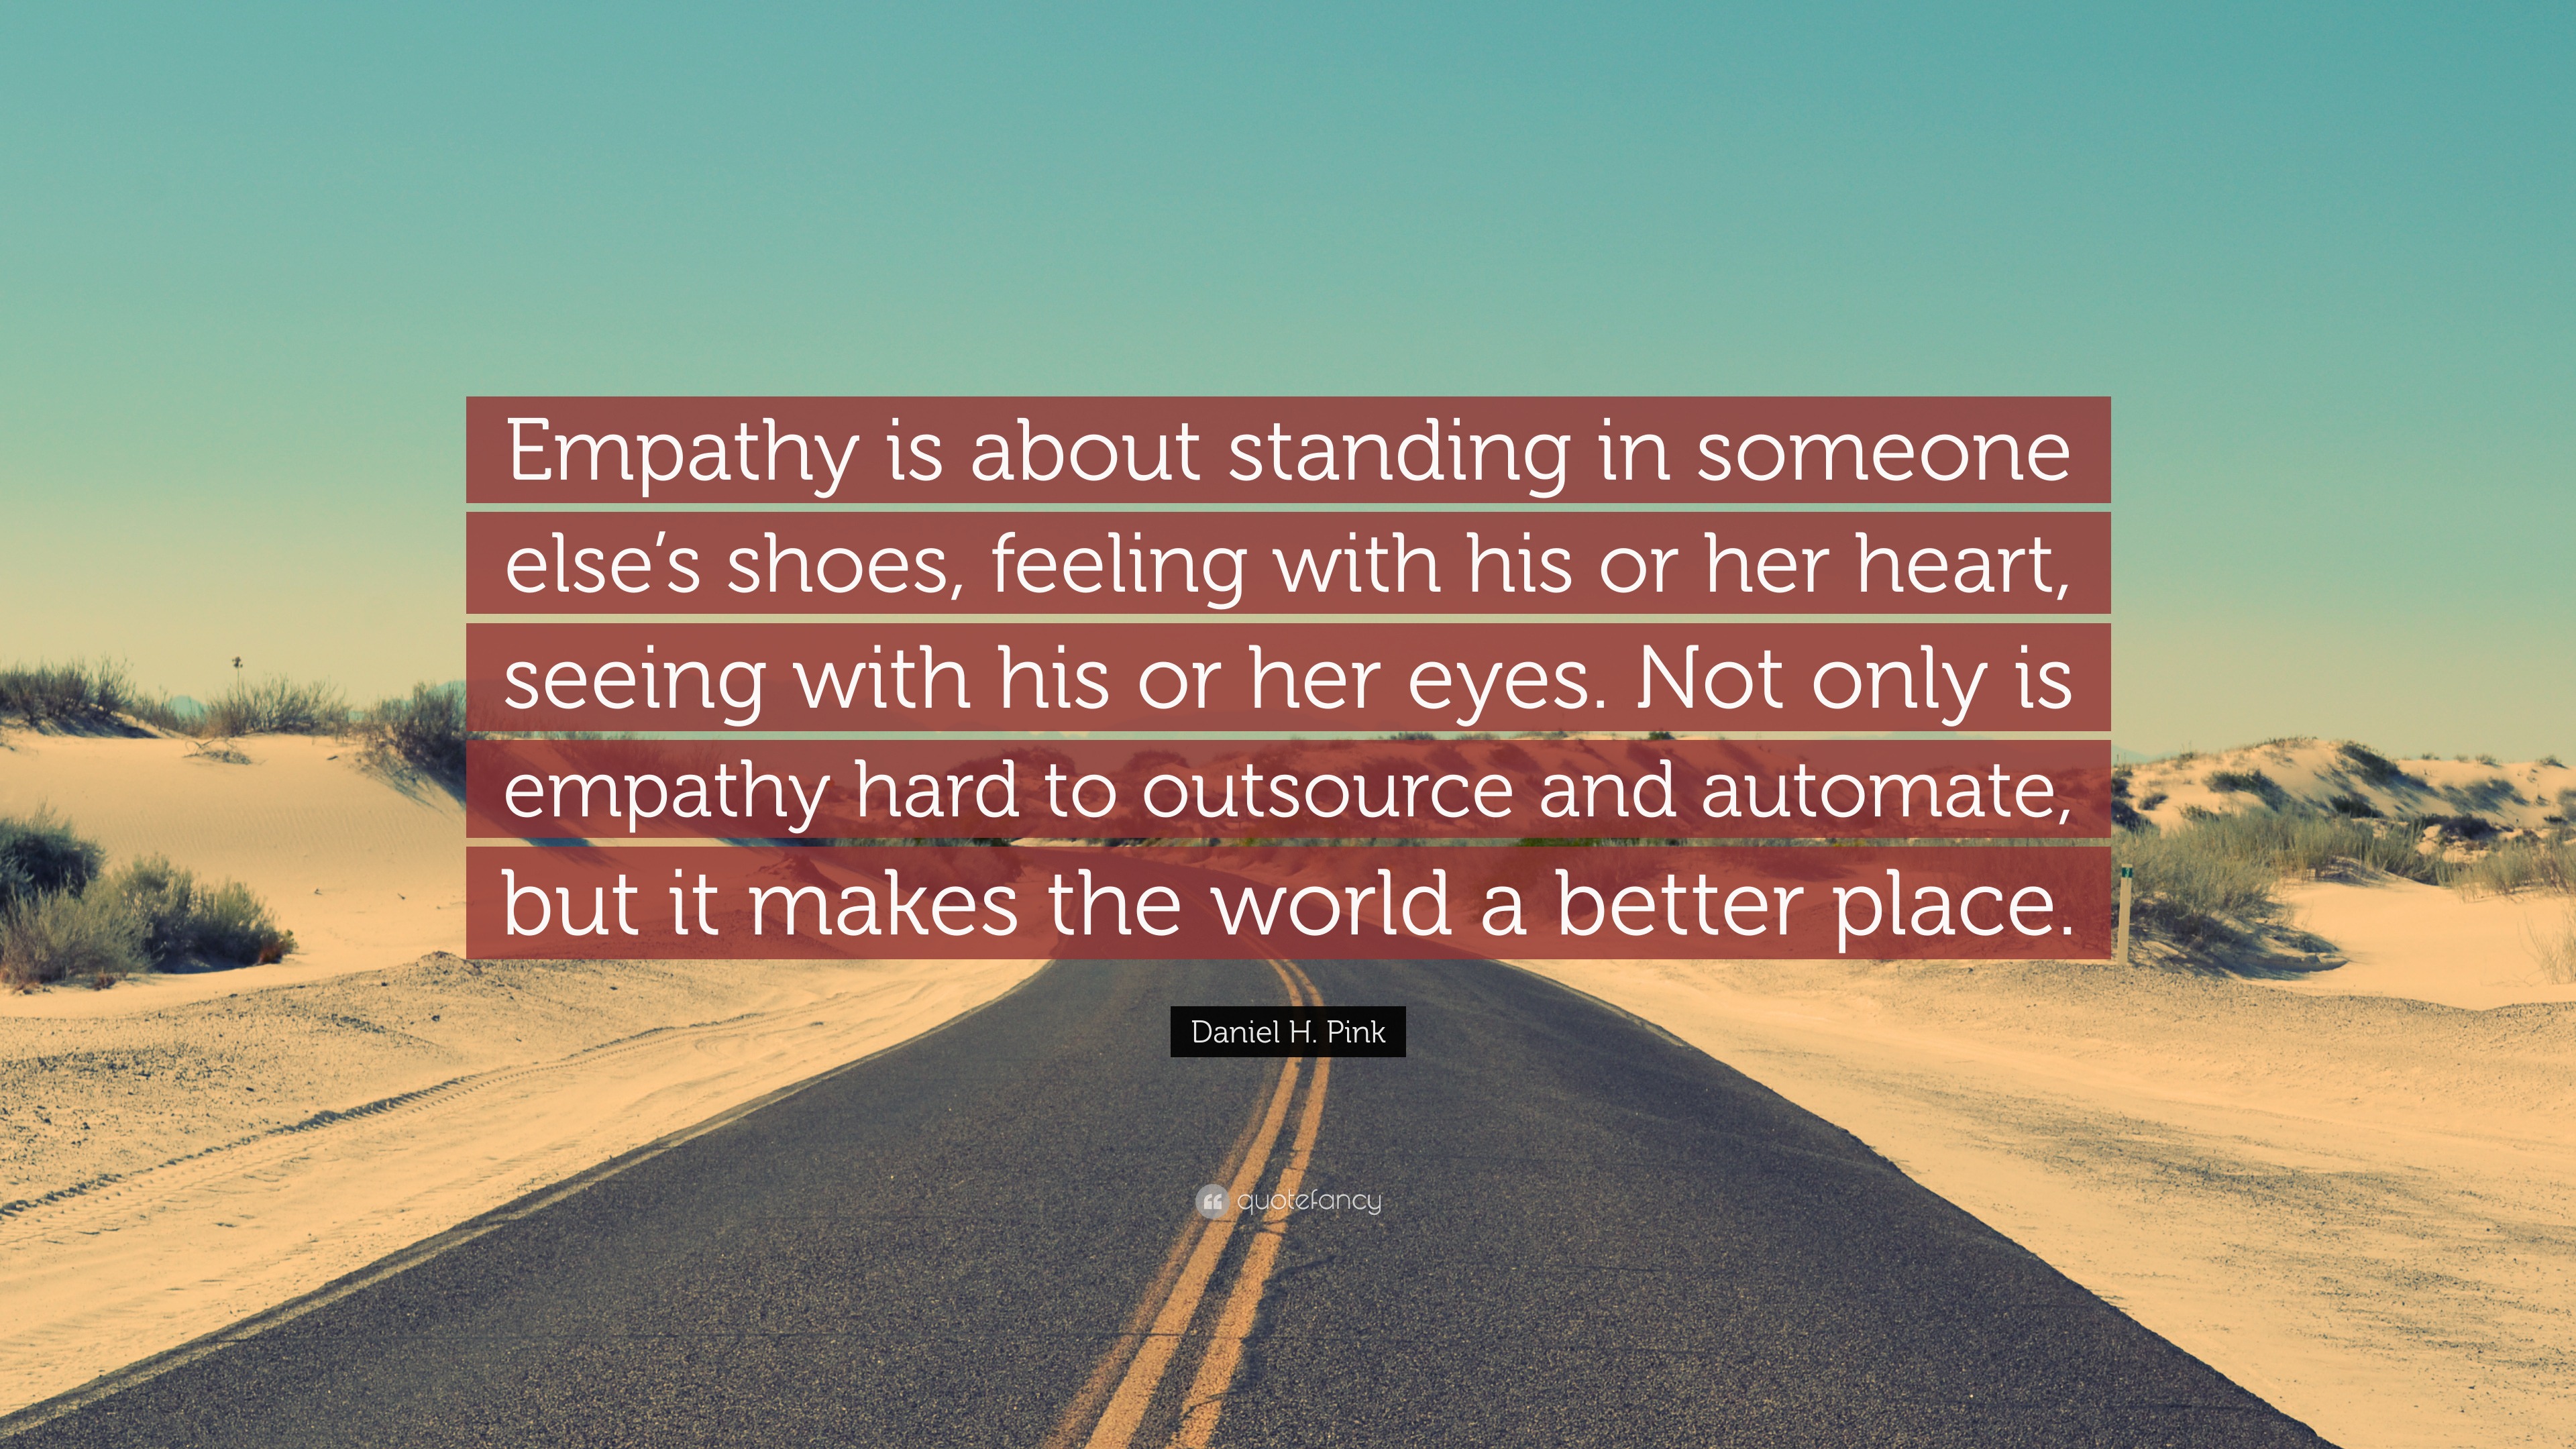 Daniel H. Pink Quote: “Empathy is about standing in someone else’s